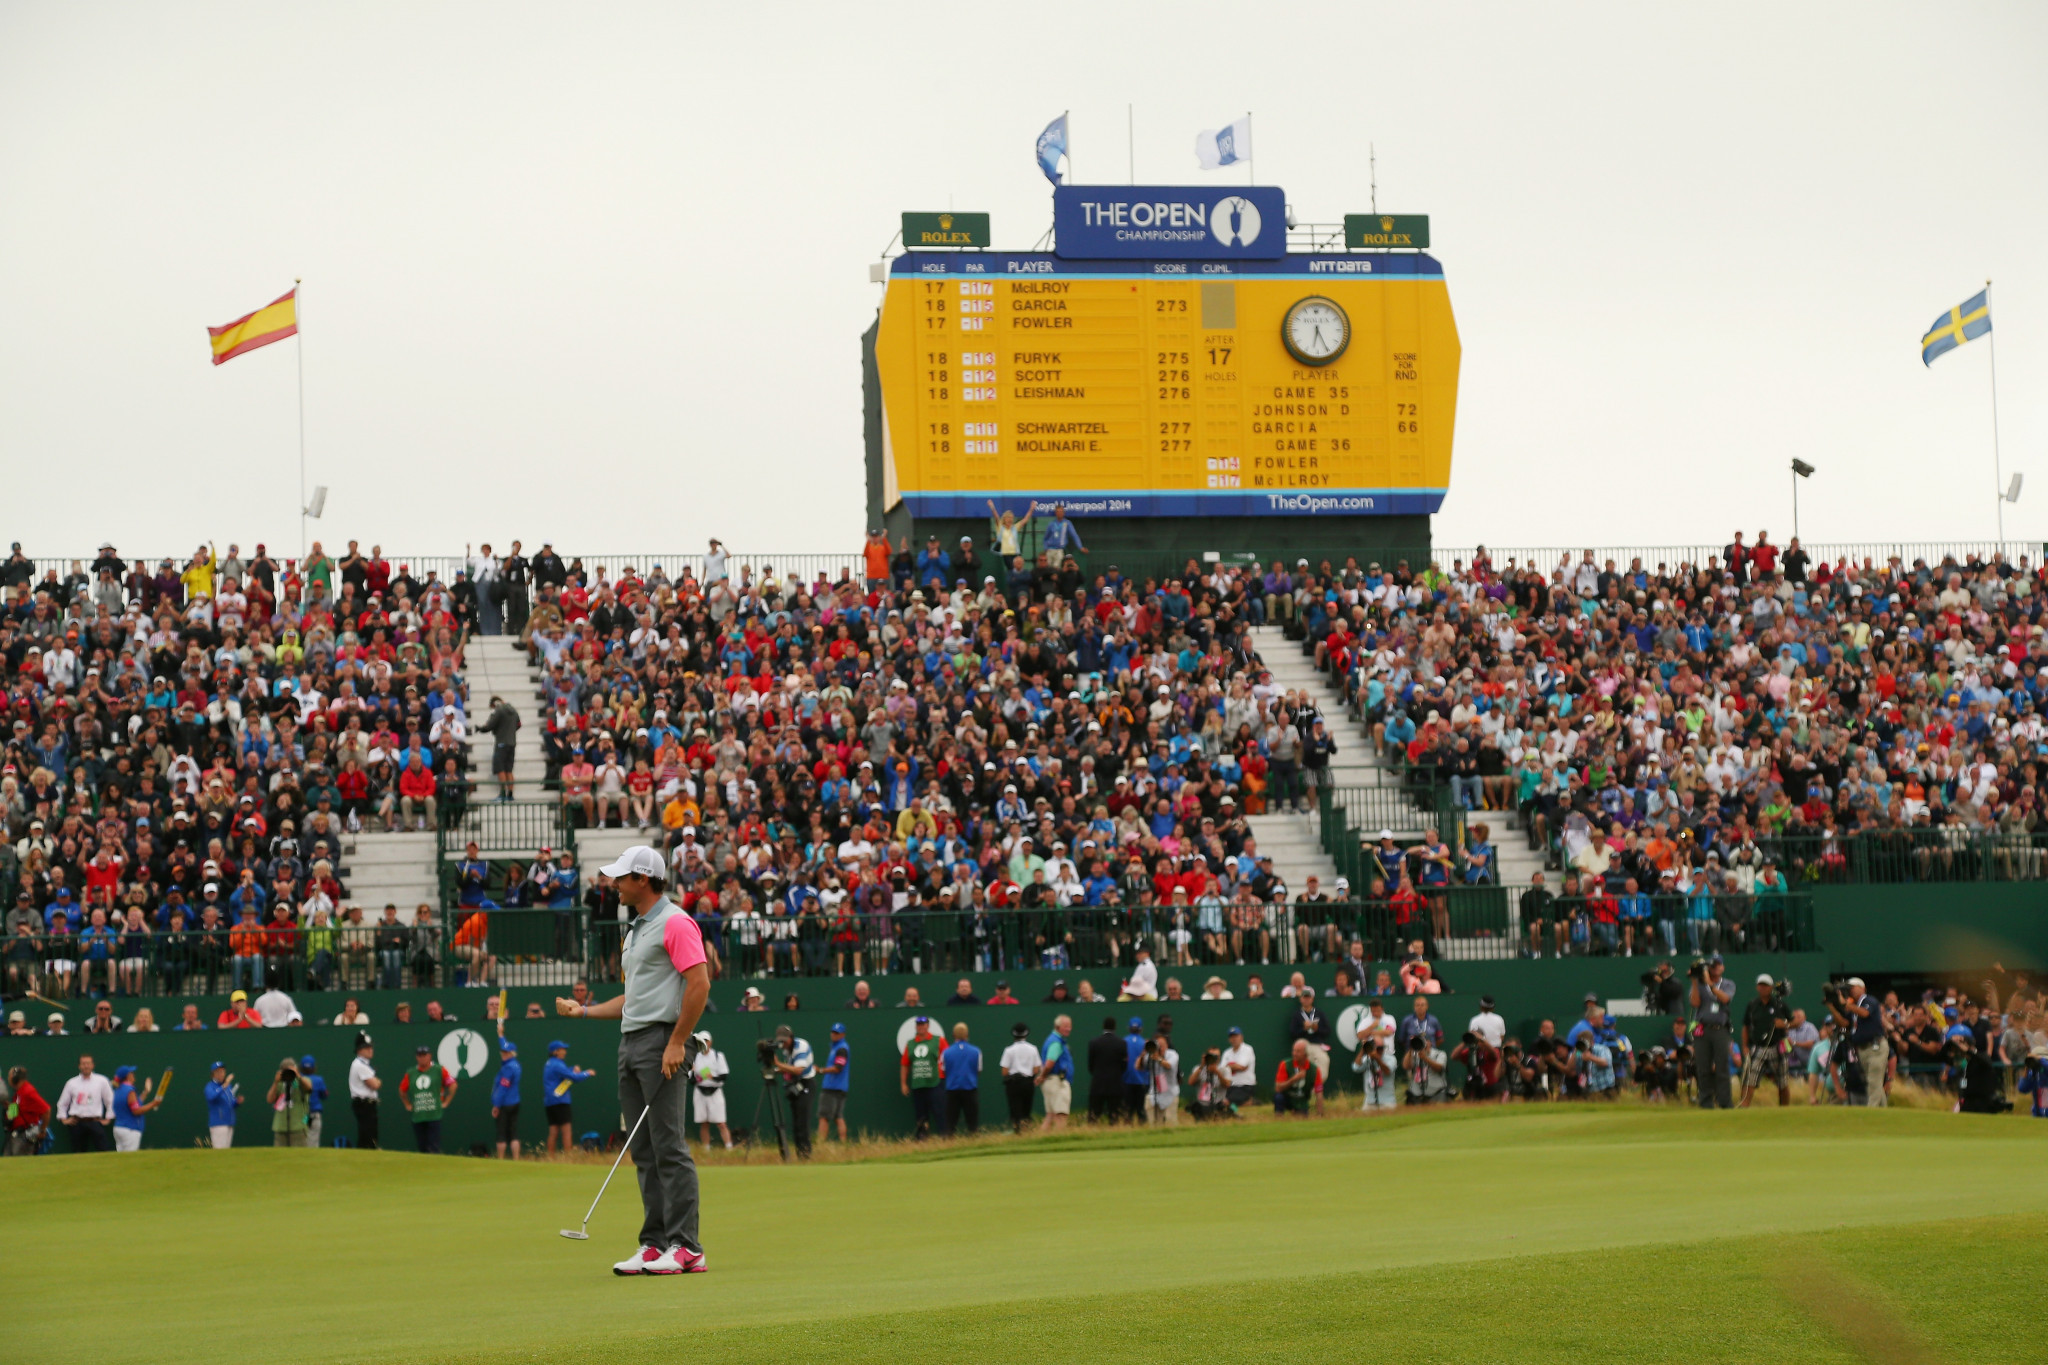 Royal Liverpool will host The Open Championship in 2022 ©Getty Images